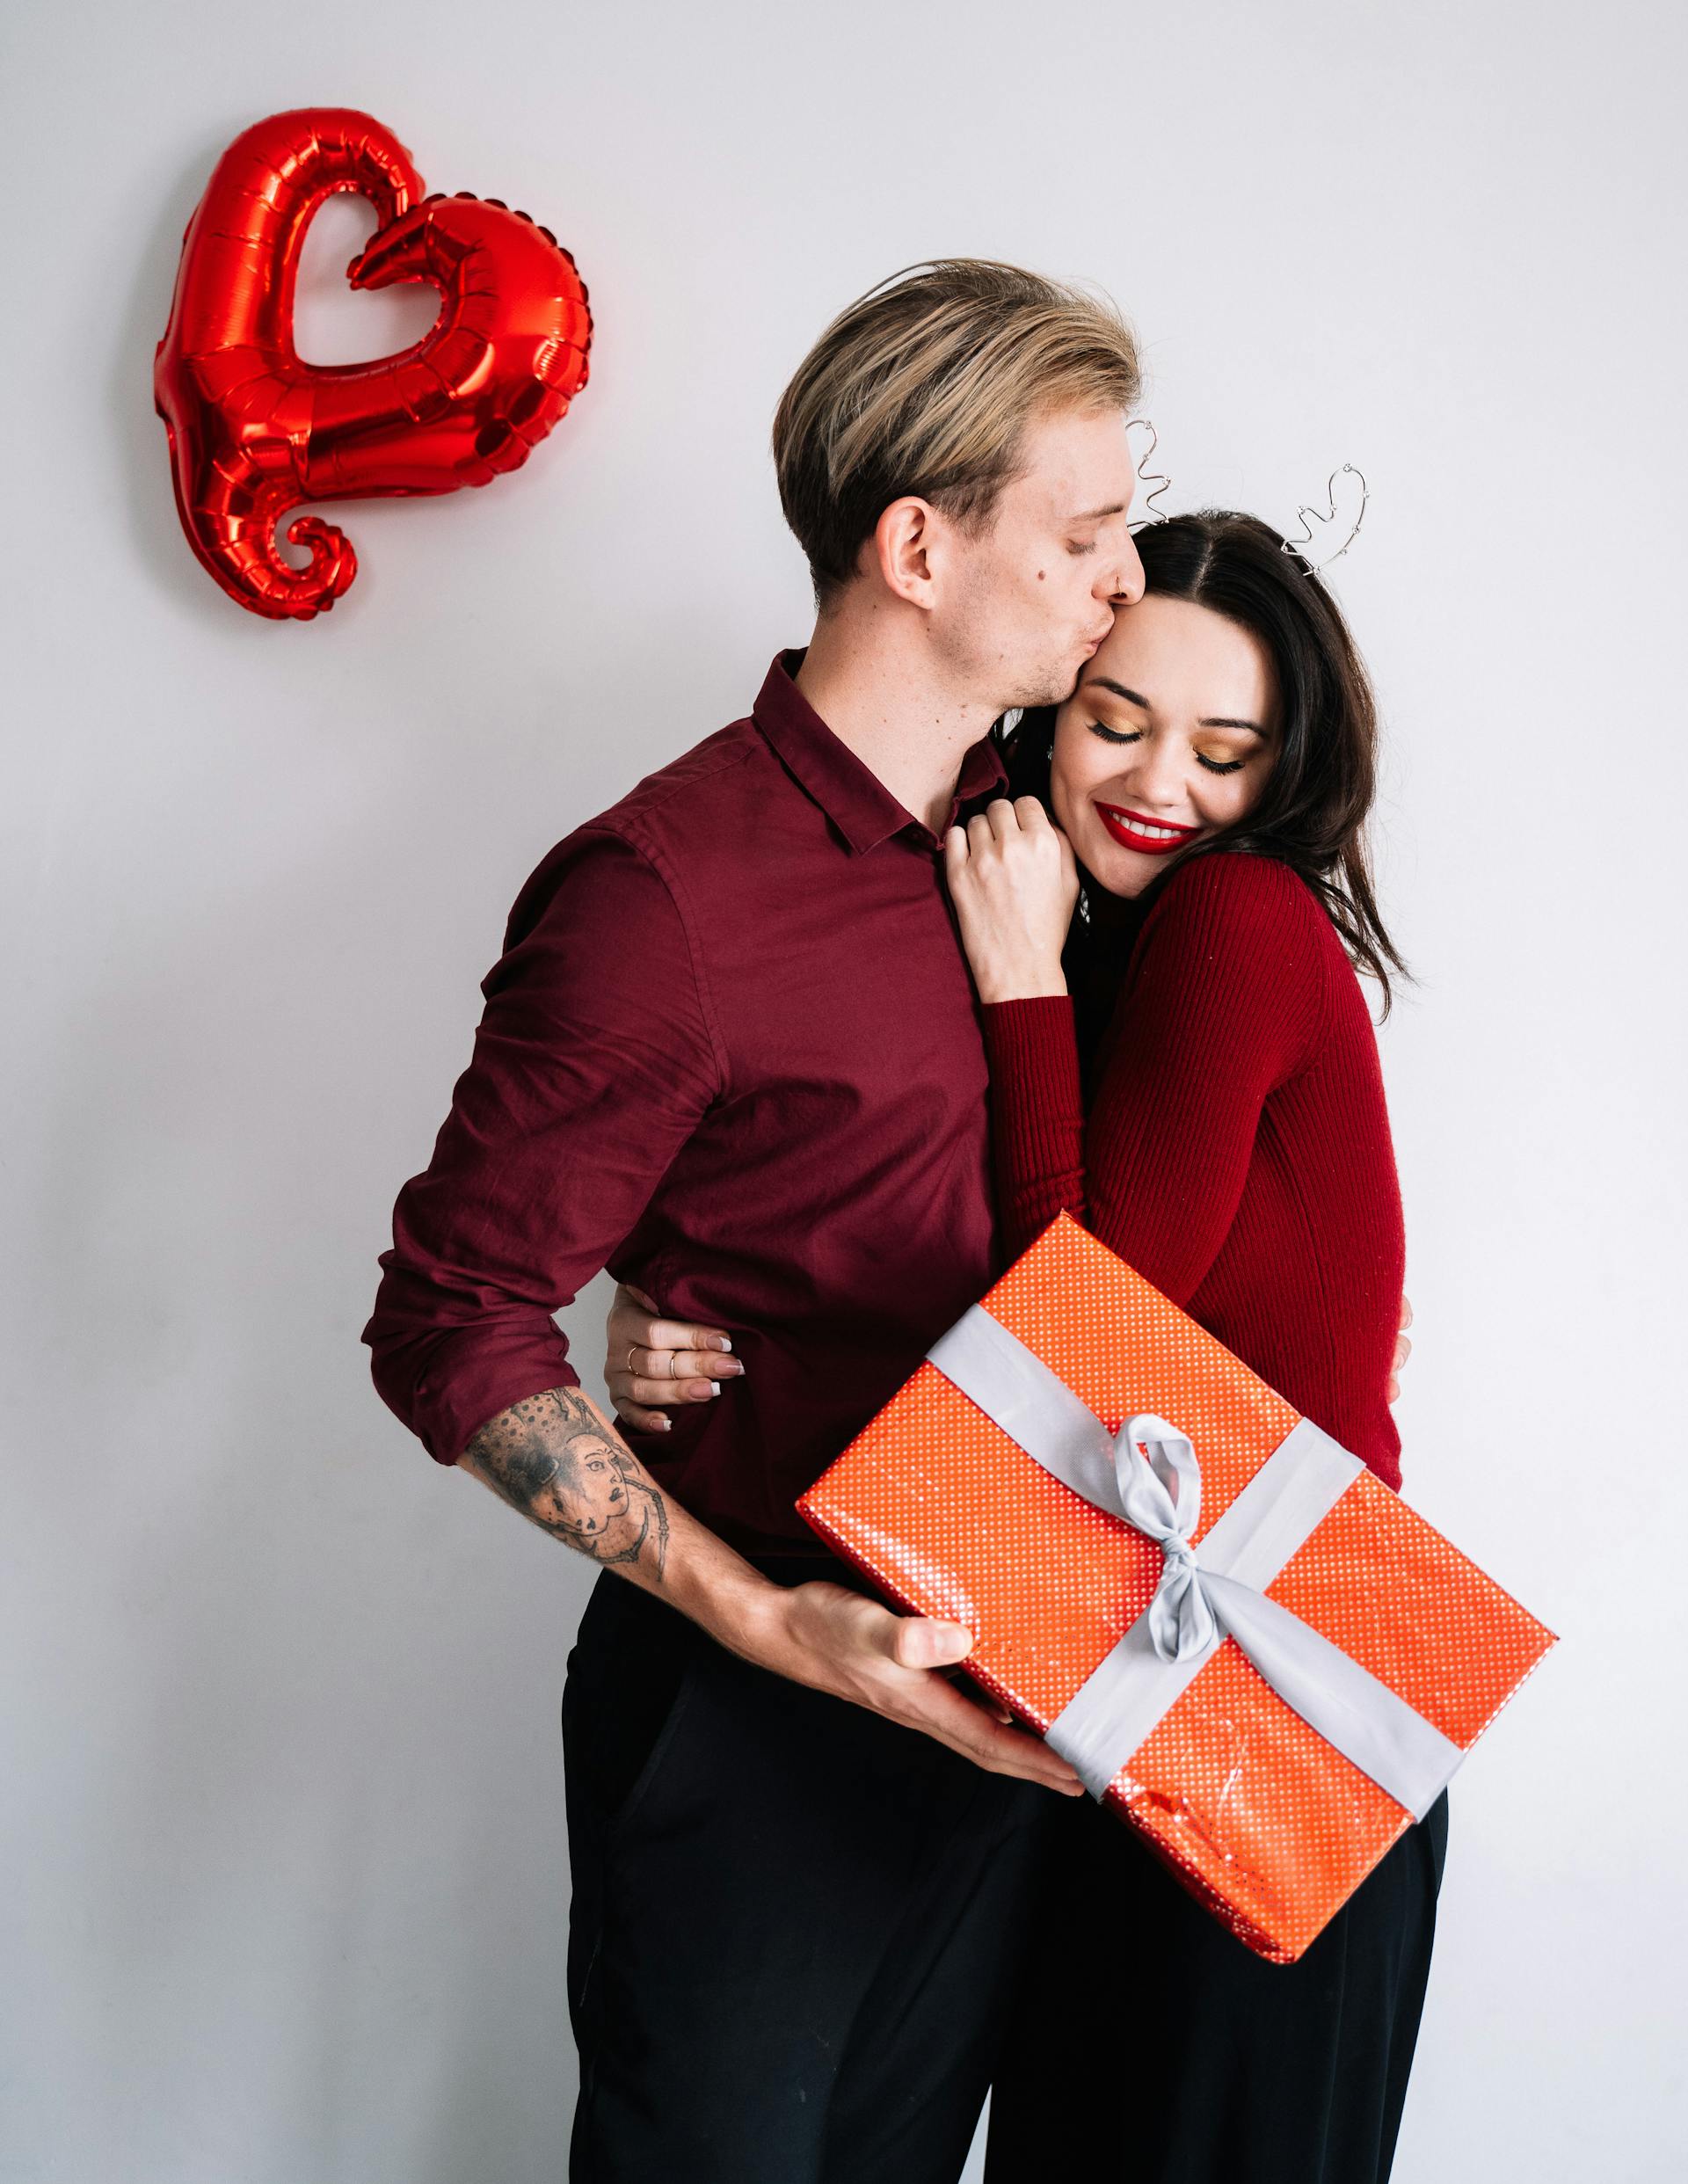 A husband kissing his wife while holding a gift | Source: Pexels